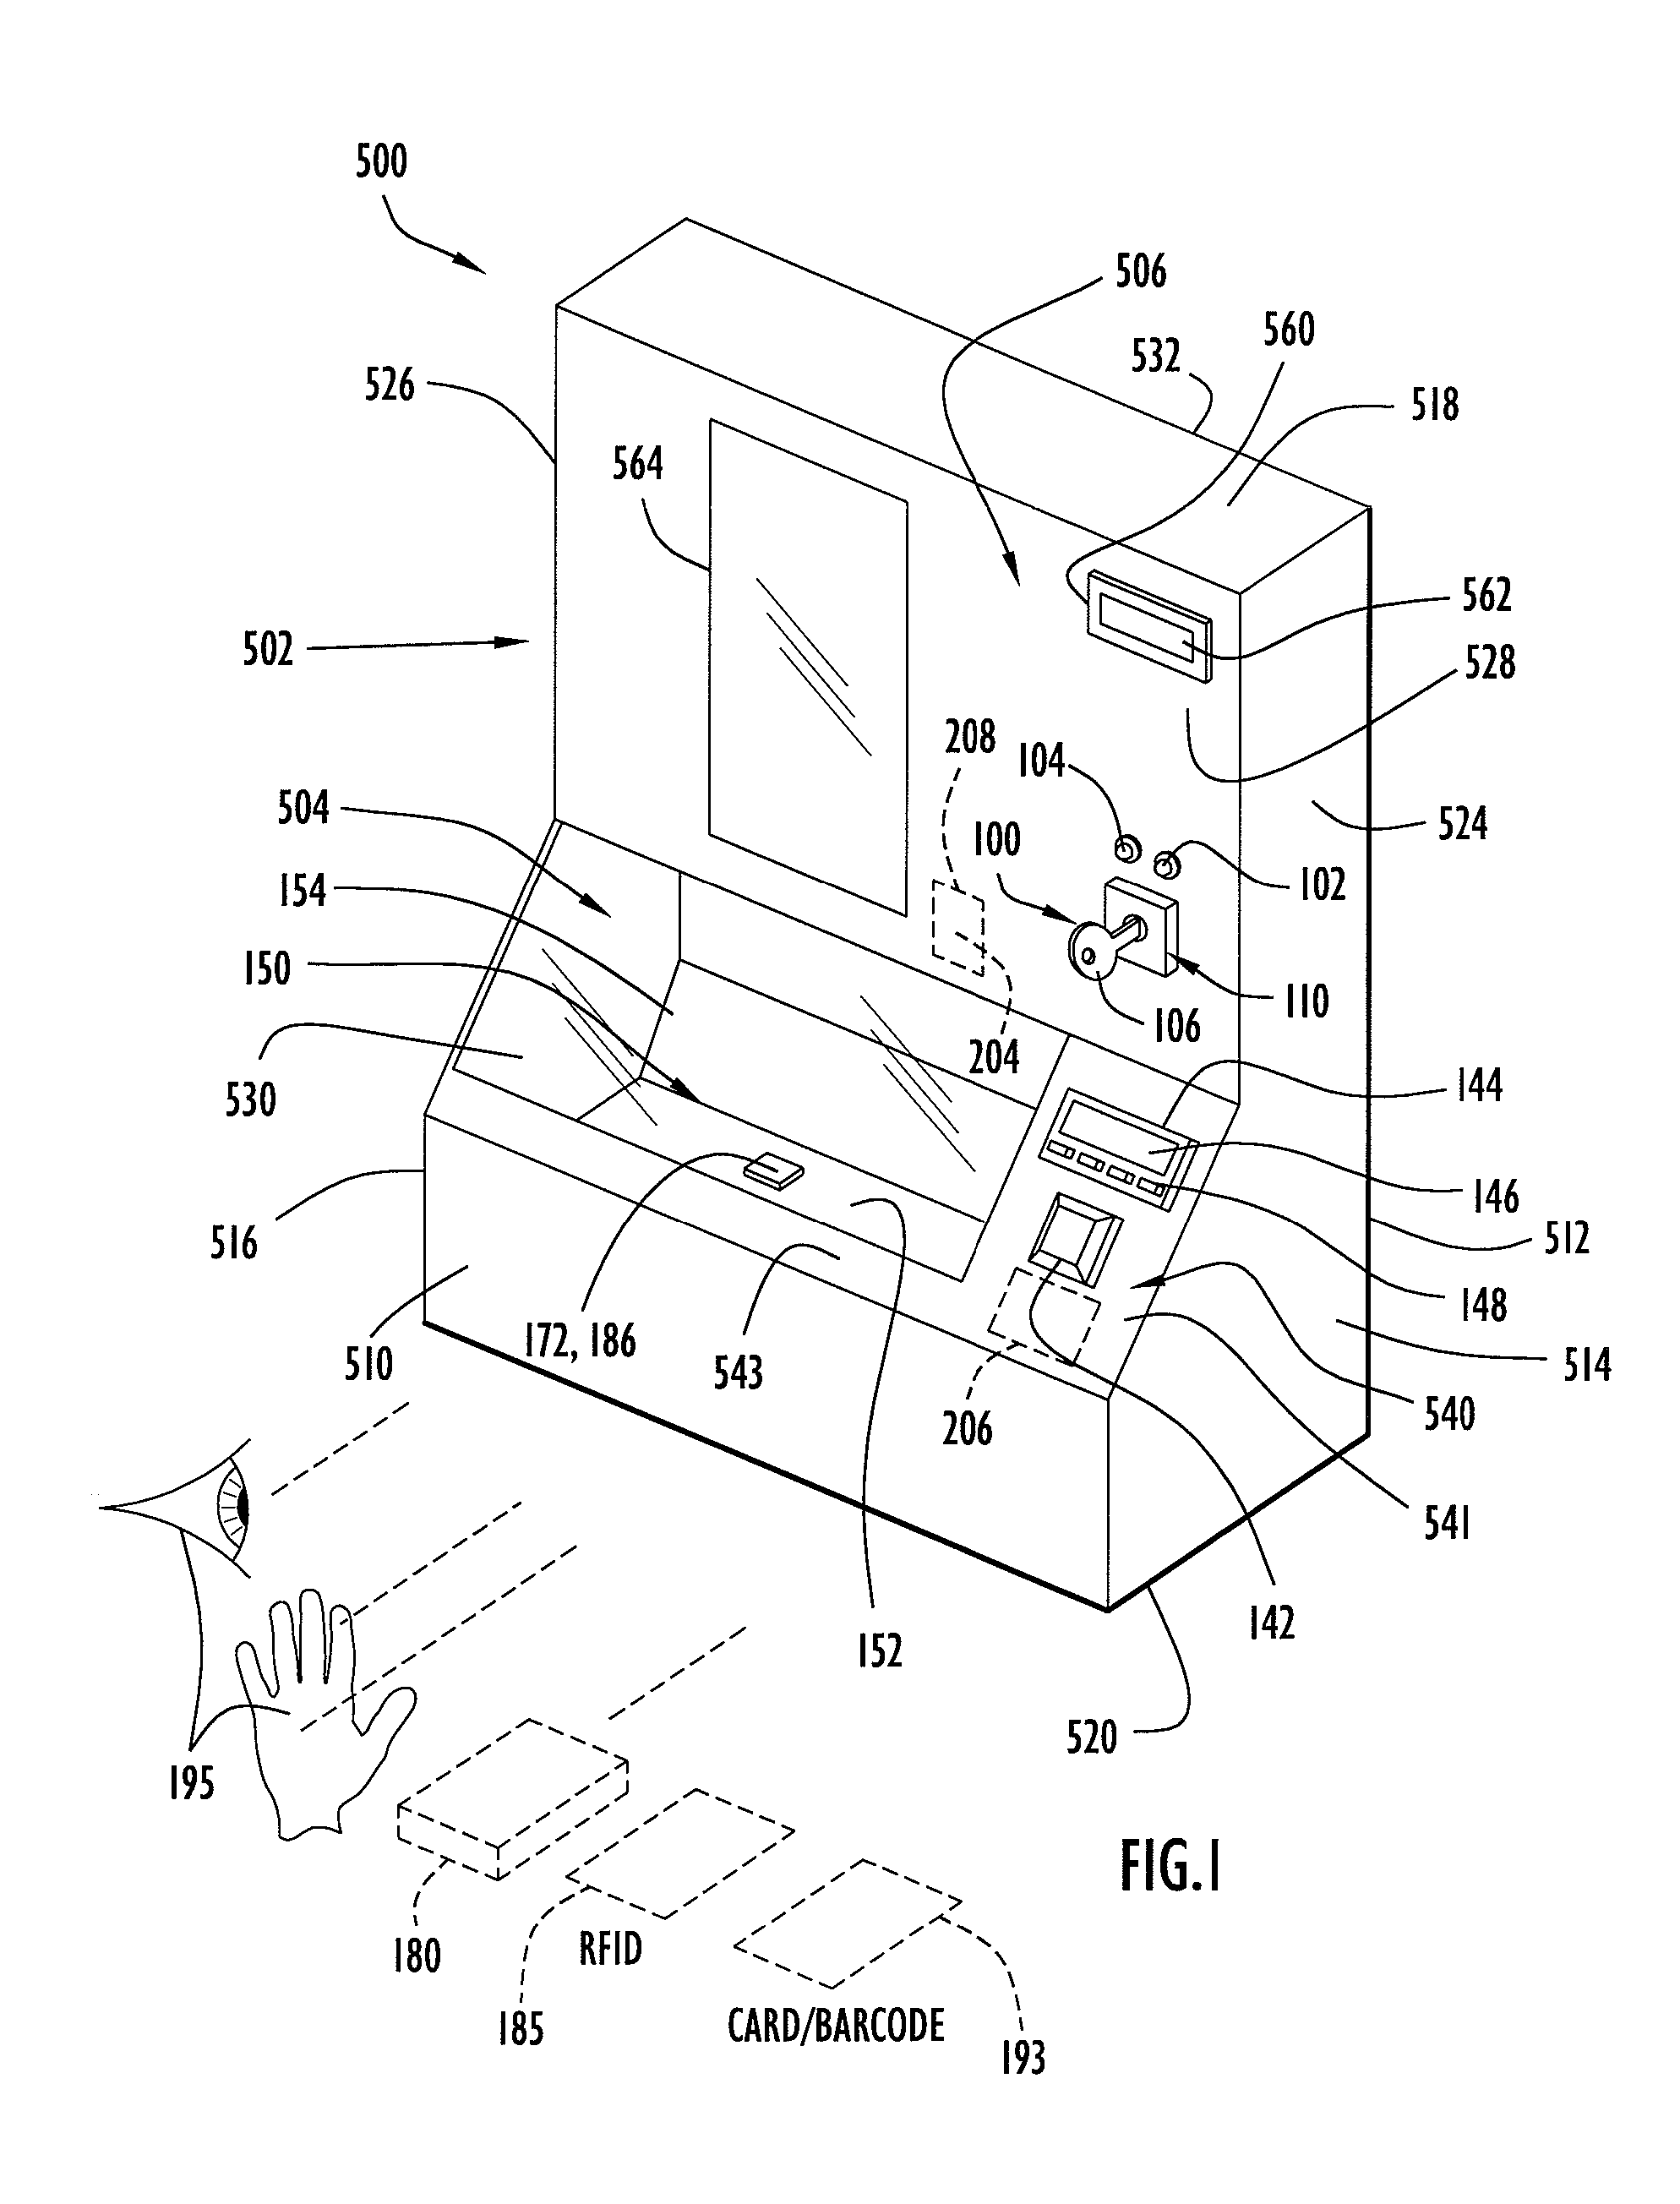 Method and Apparatus for Securely Storing Medical Items Within a Thermal Treatment System